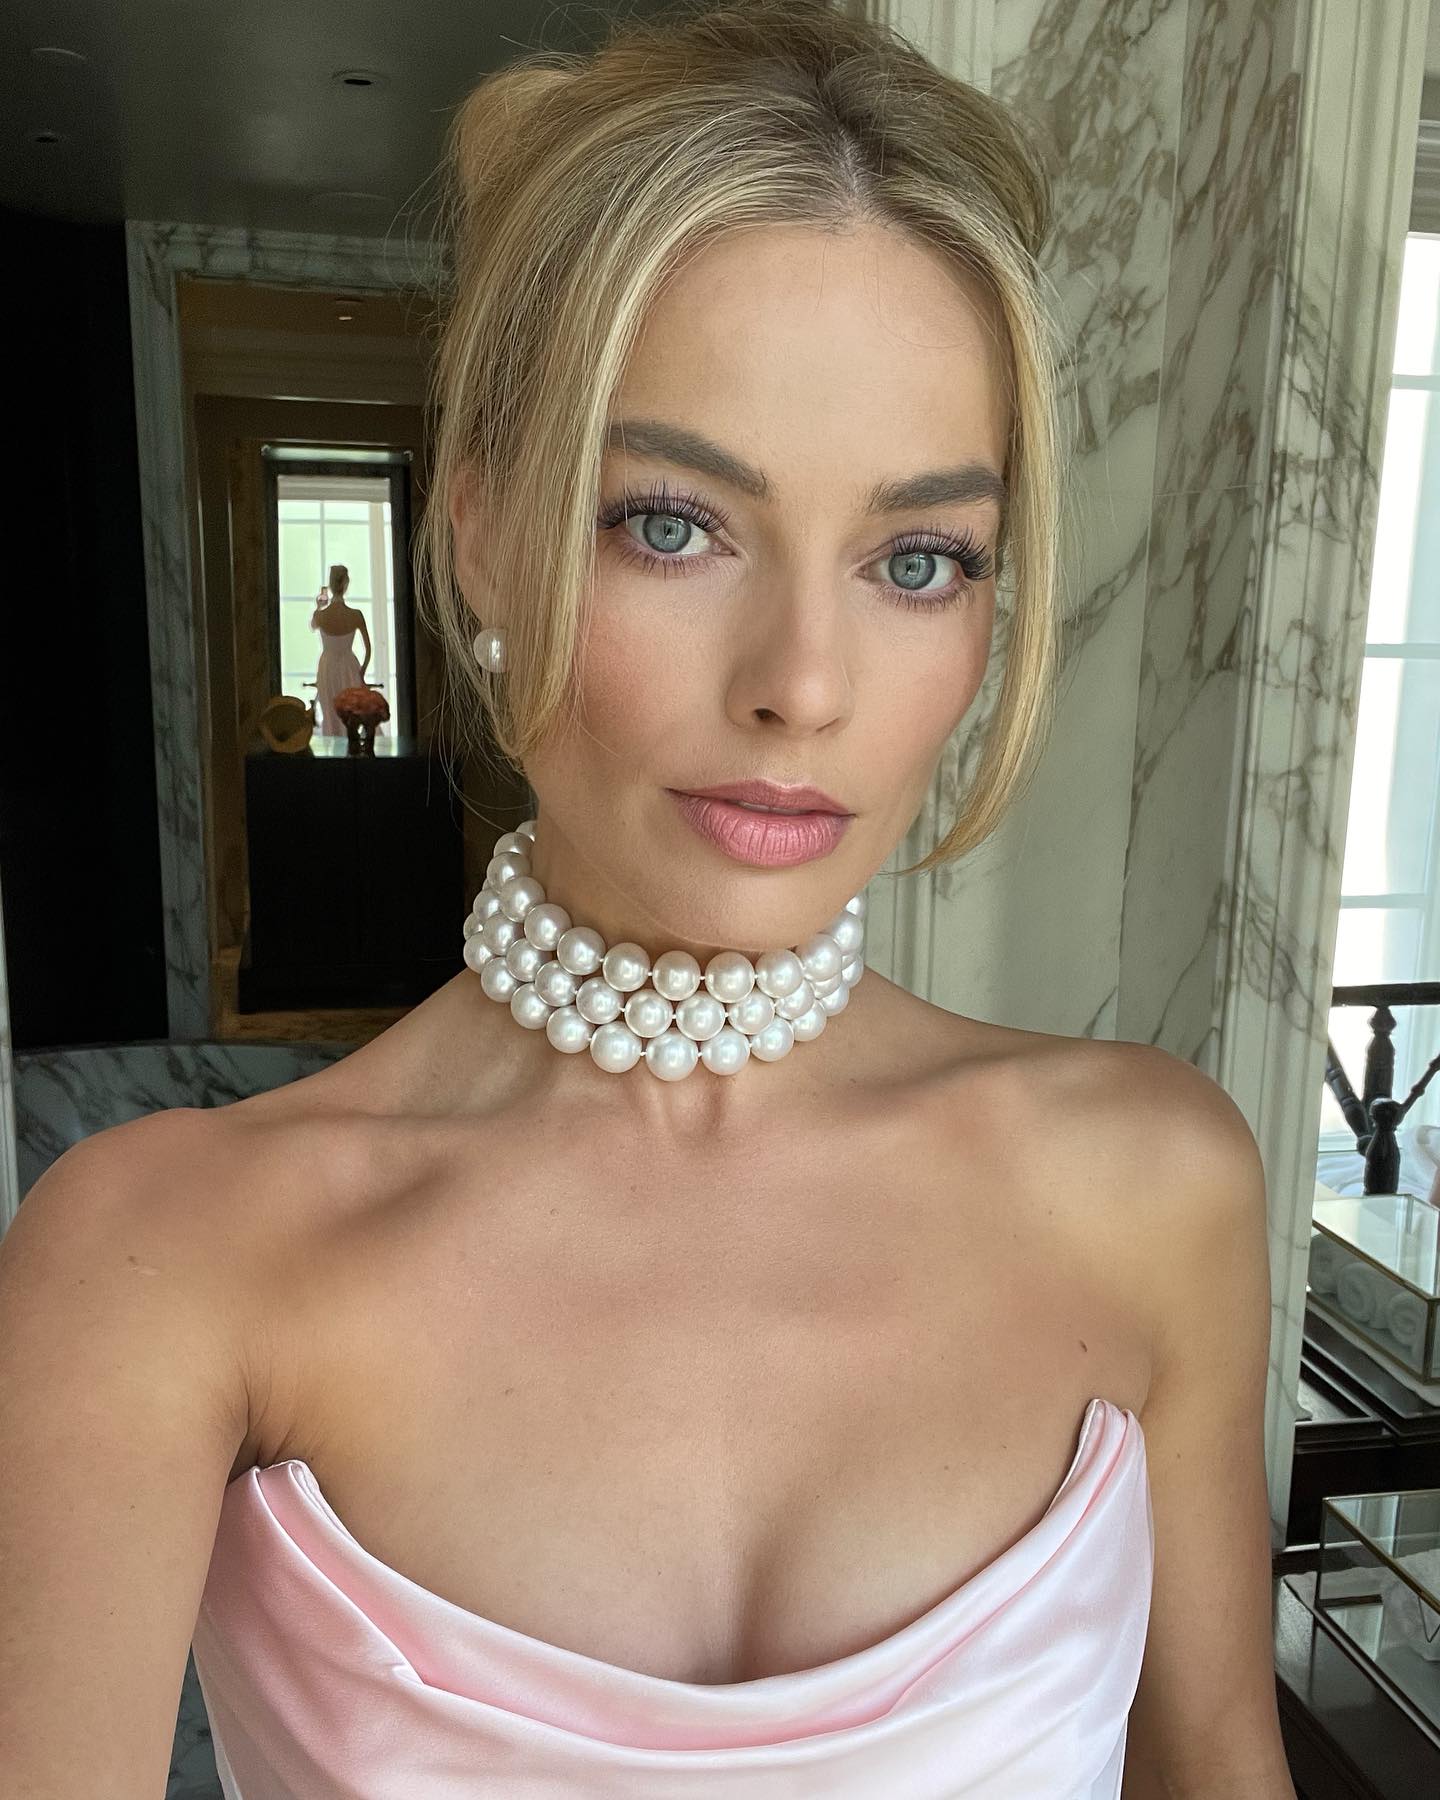 Every Barbie-Inspired Outfit Margot Robbie Wore on 'Barbie' Press Tour